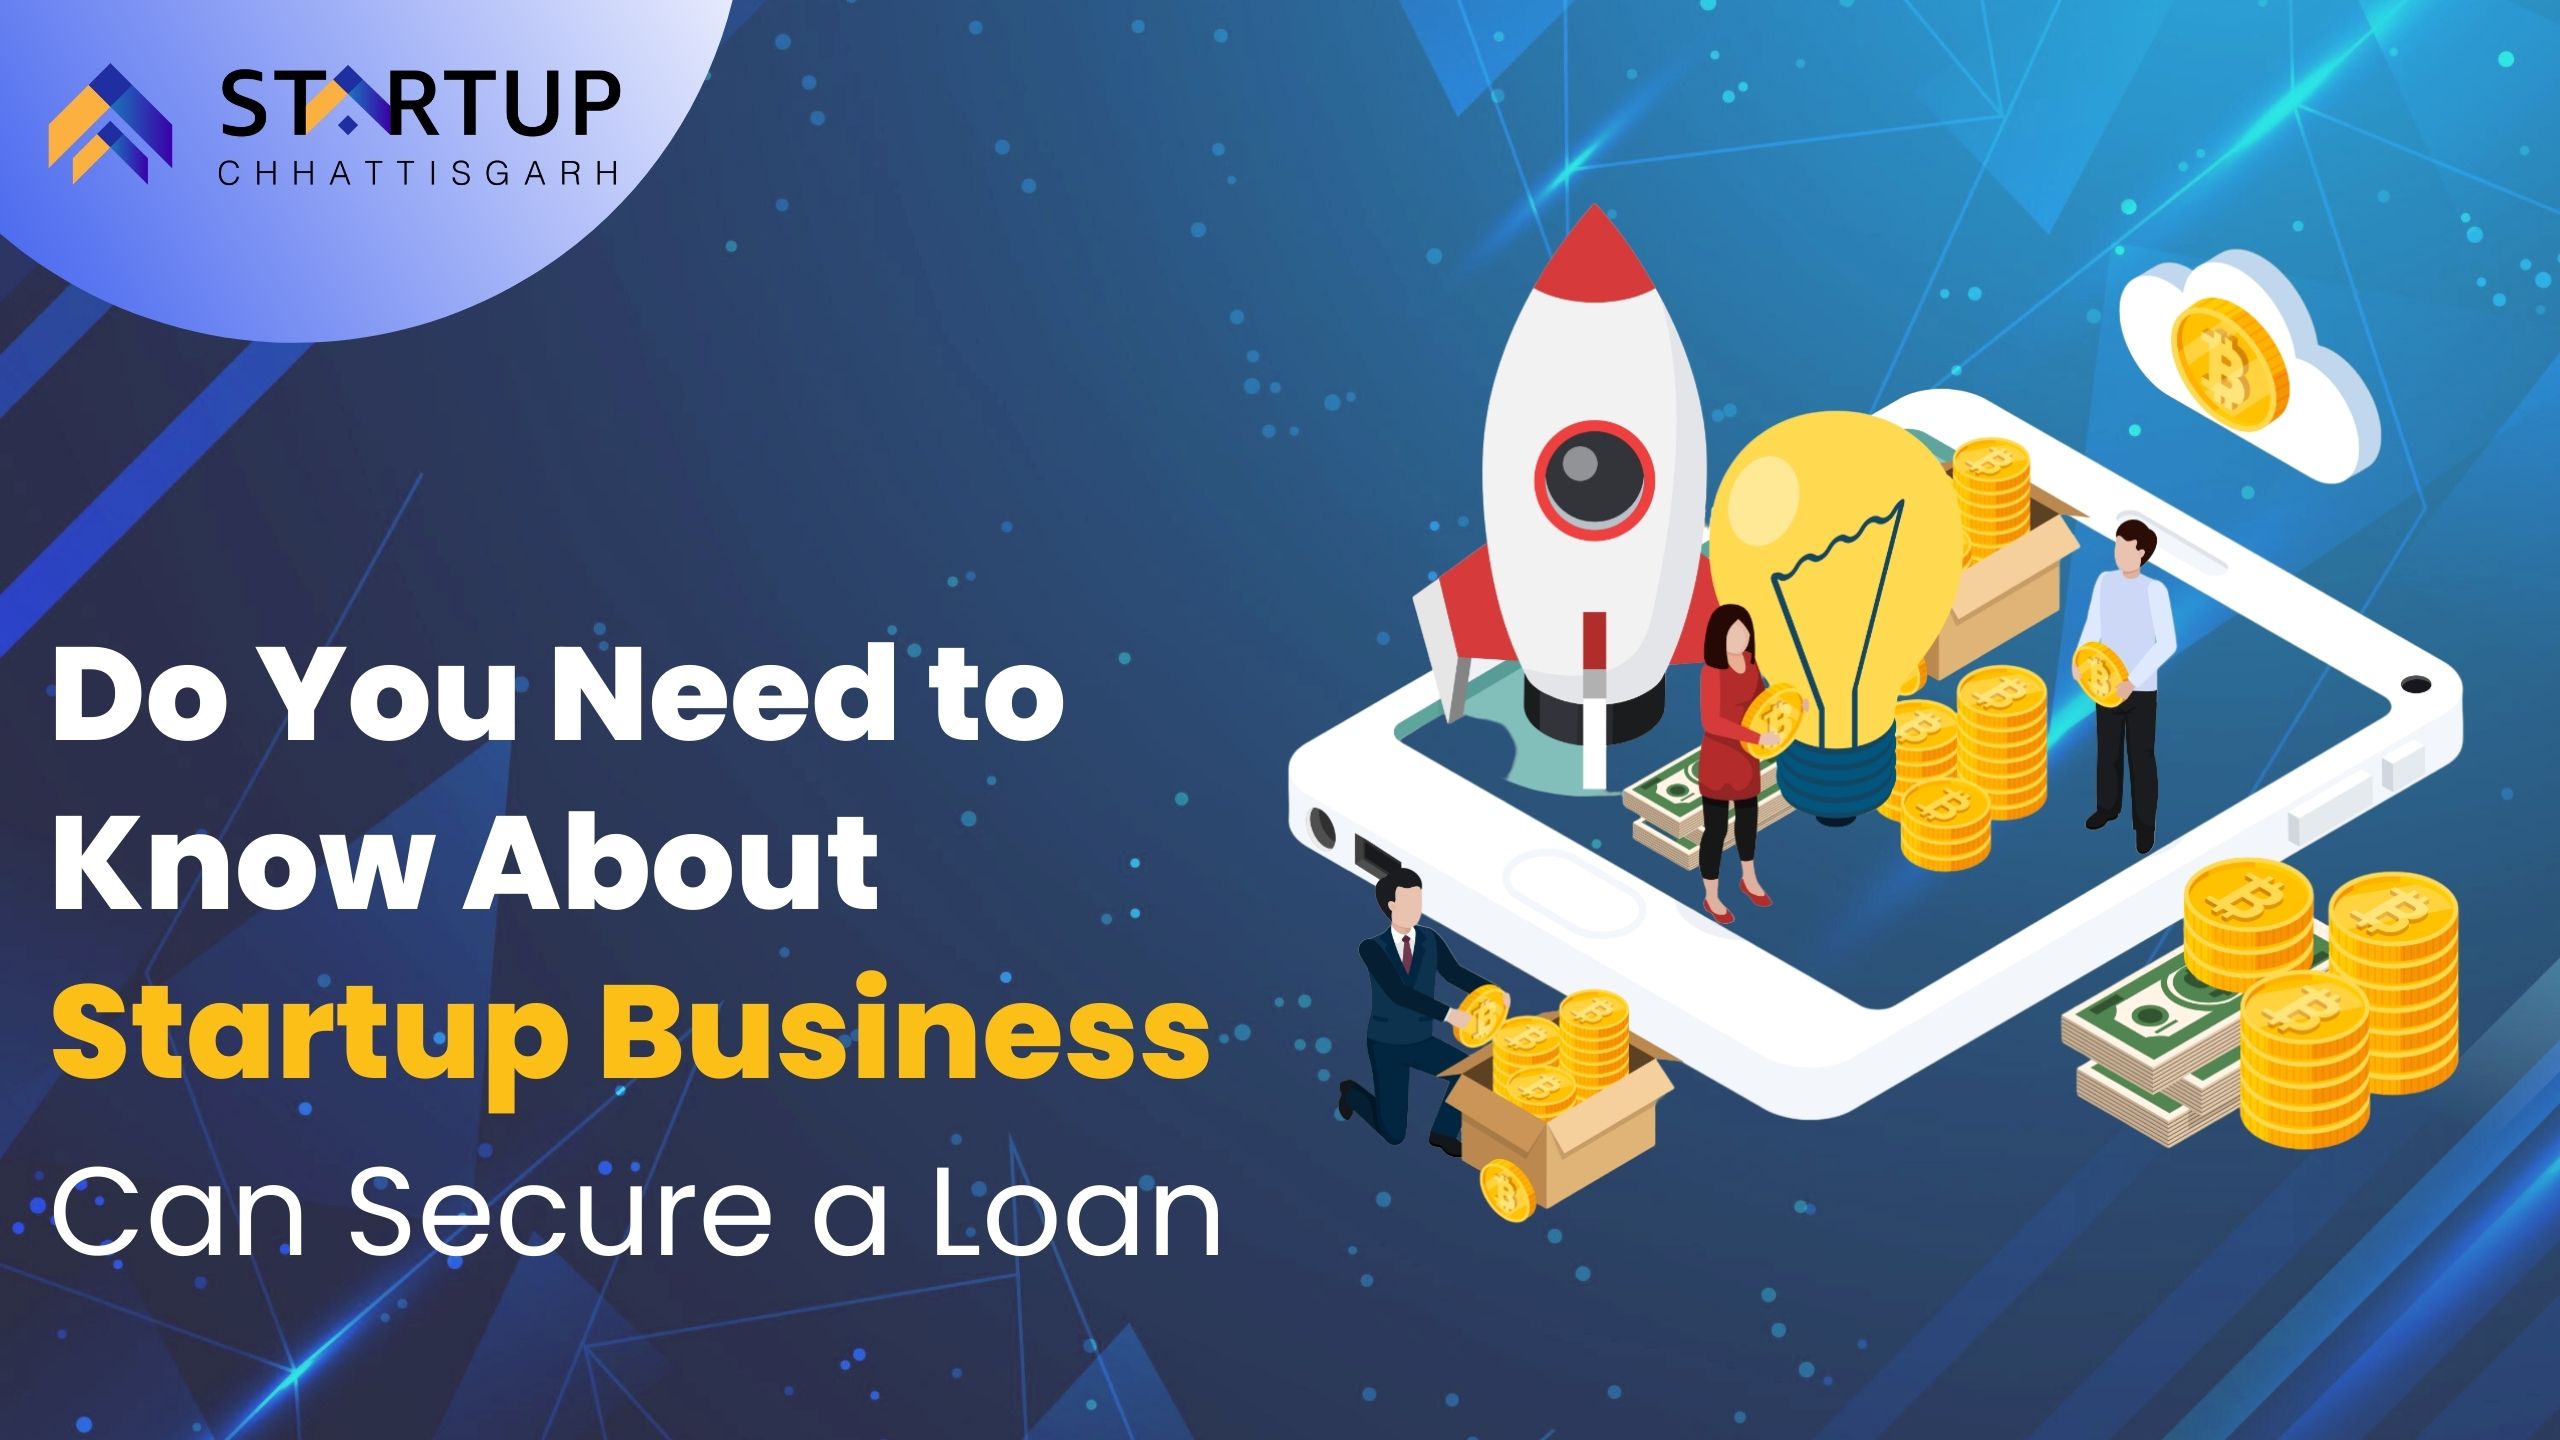 Do You Need to Know About Startup Business can Secure a Loan